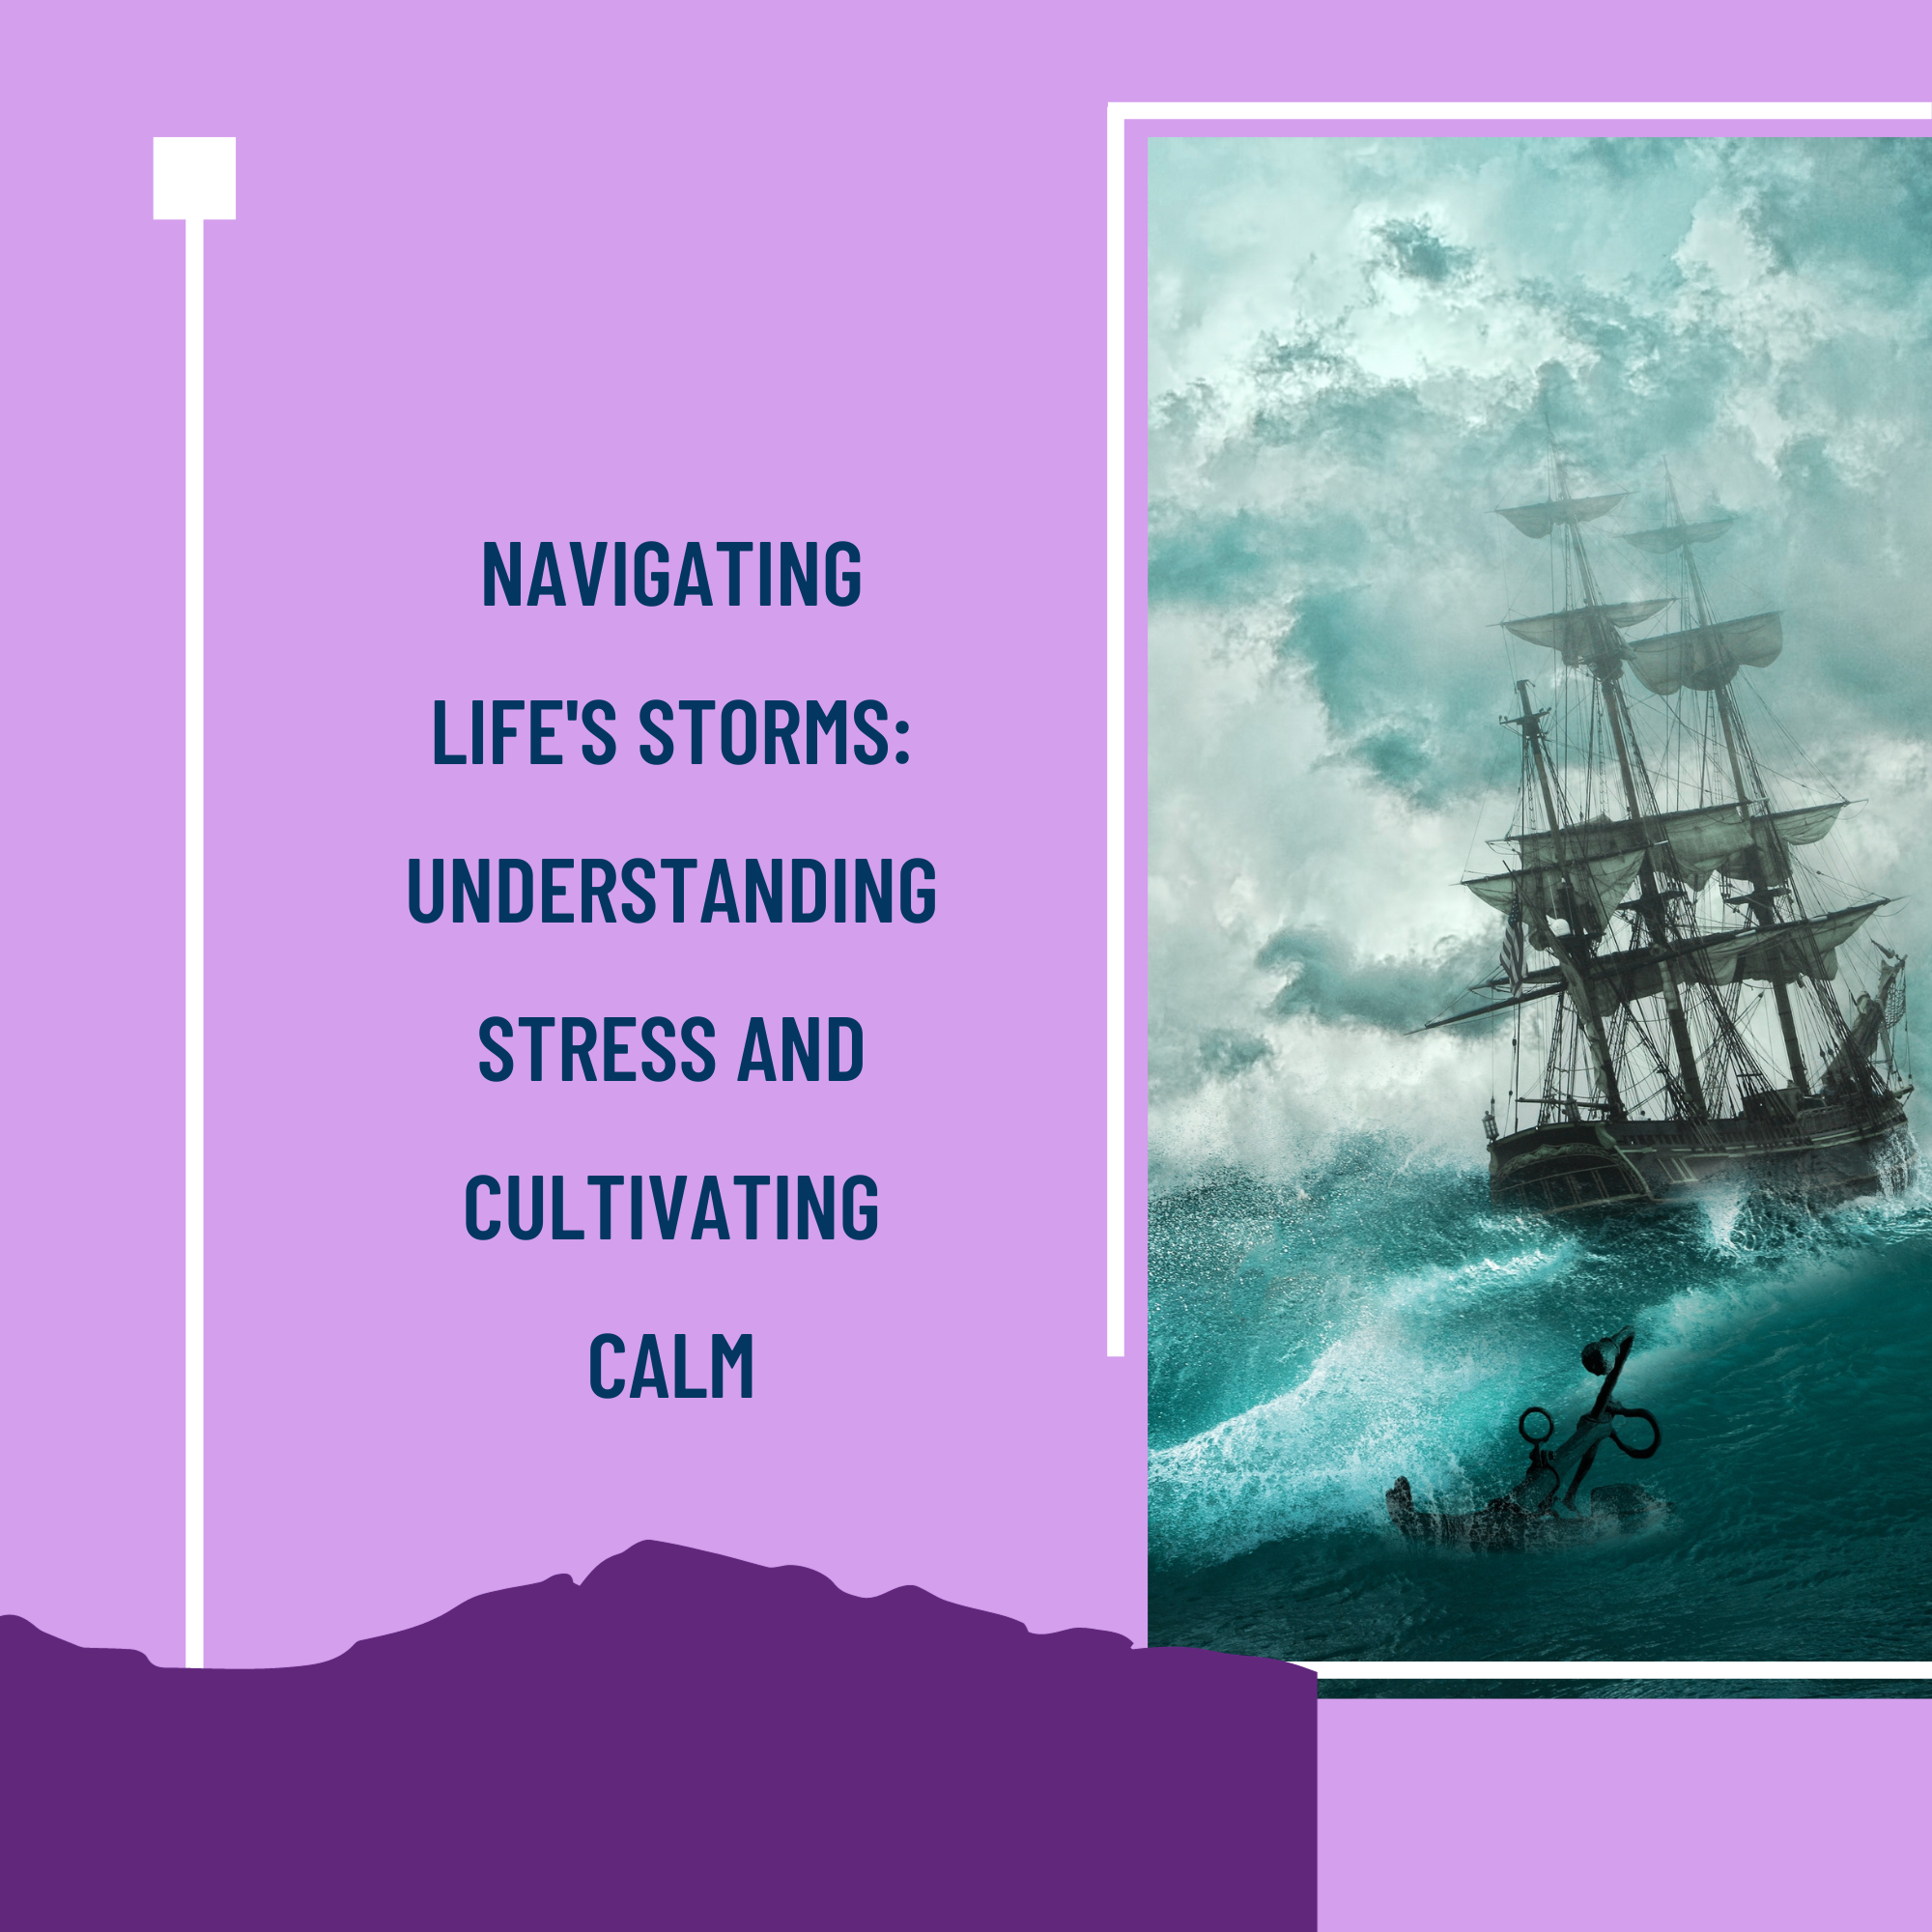 Navigating Life's Storms: Understanding Stress and Cultivating Calm